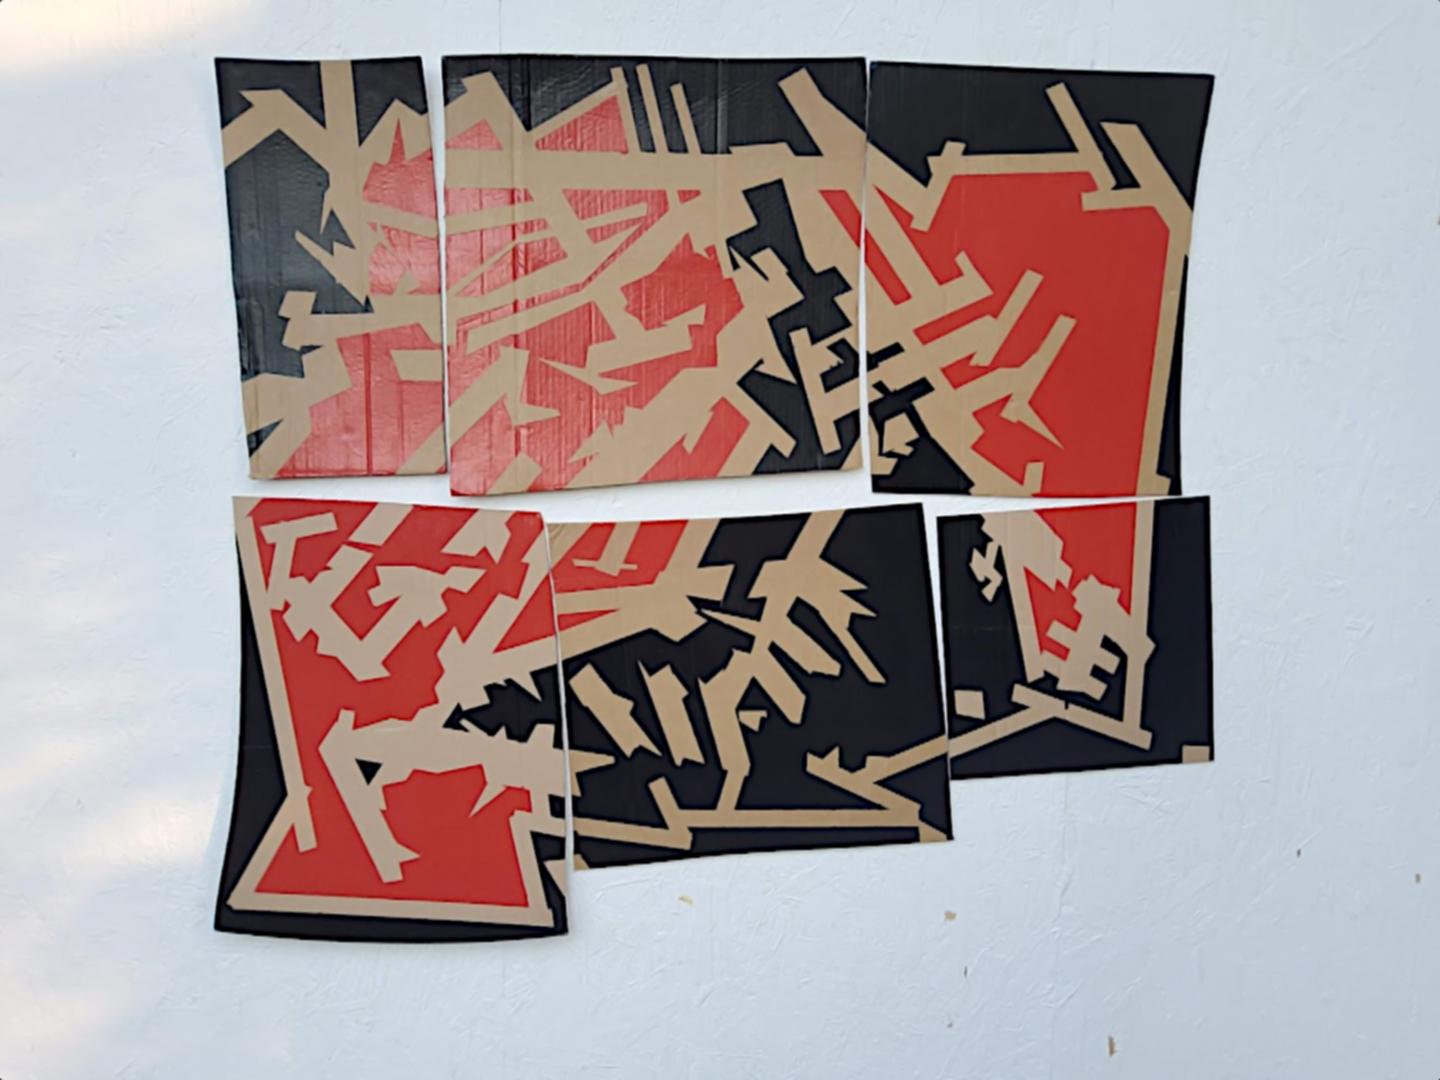 Marcus Centmayer - "Cairo of the Mameluks".

Abstract acrylic works on corrugated cardboard from the series Rouge et Noir.
Concrete Art that develops its own artistic expression with materials from the art movements of Street Art and Ready